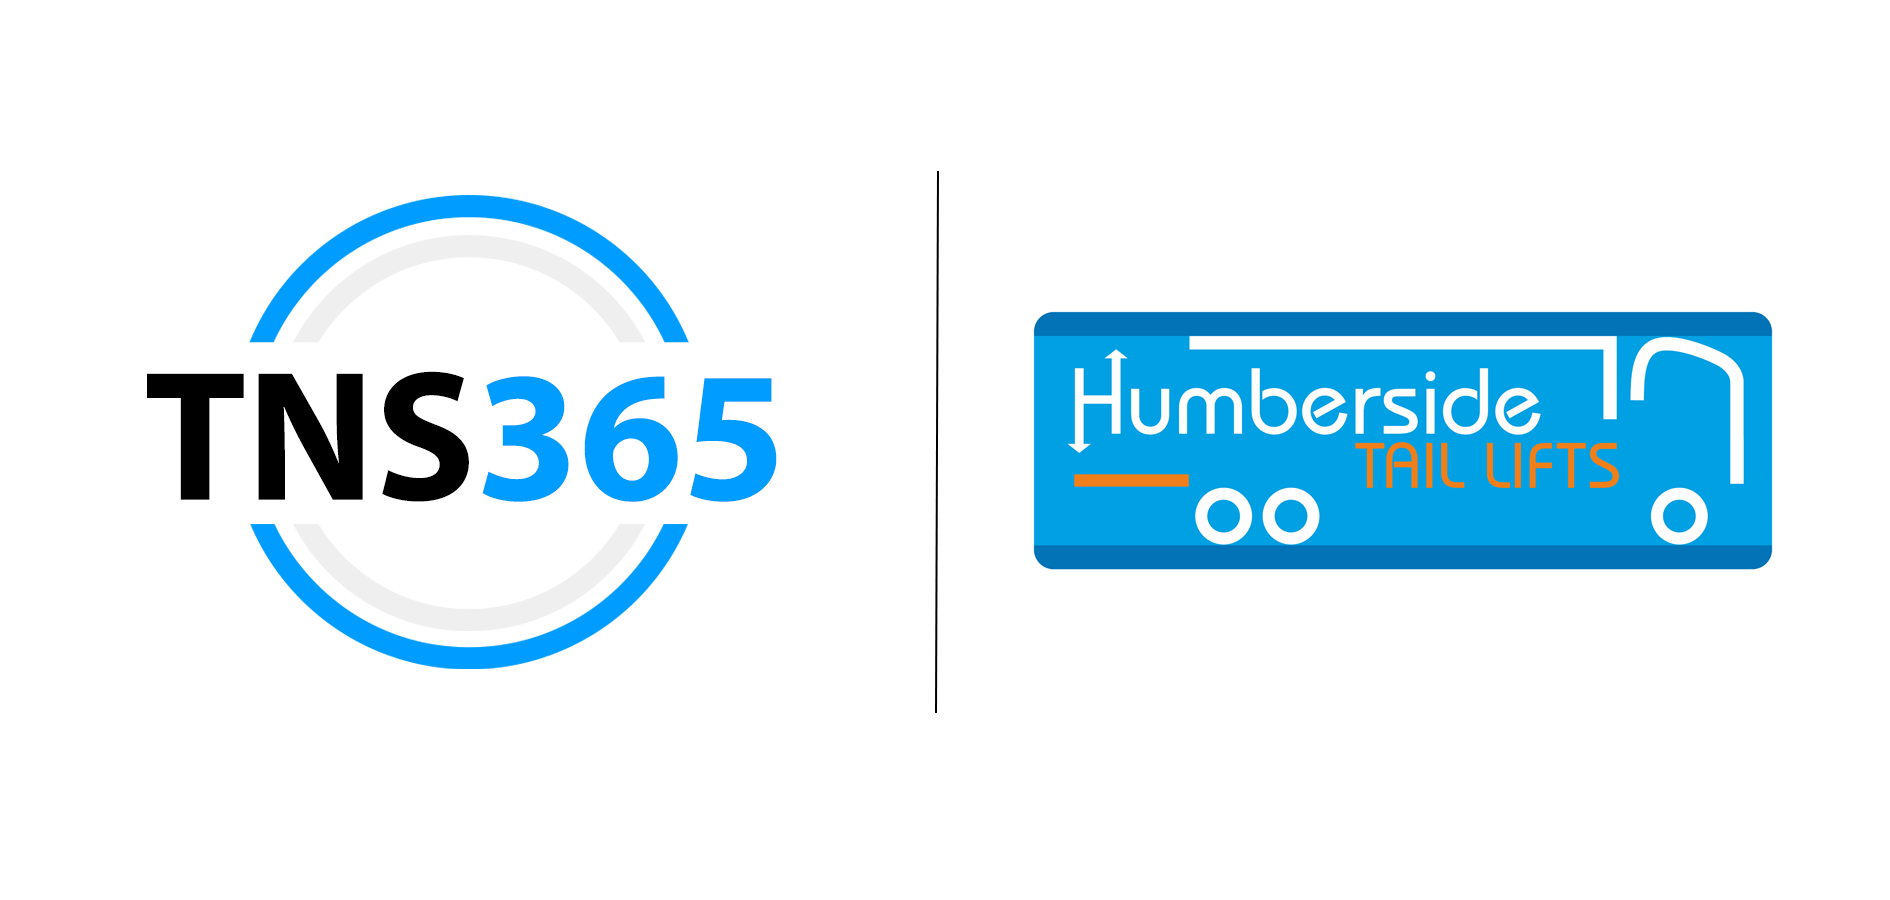 Humberside Tail Lifts Switch To Unlock Growth And Future Innovation With TNS 365